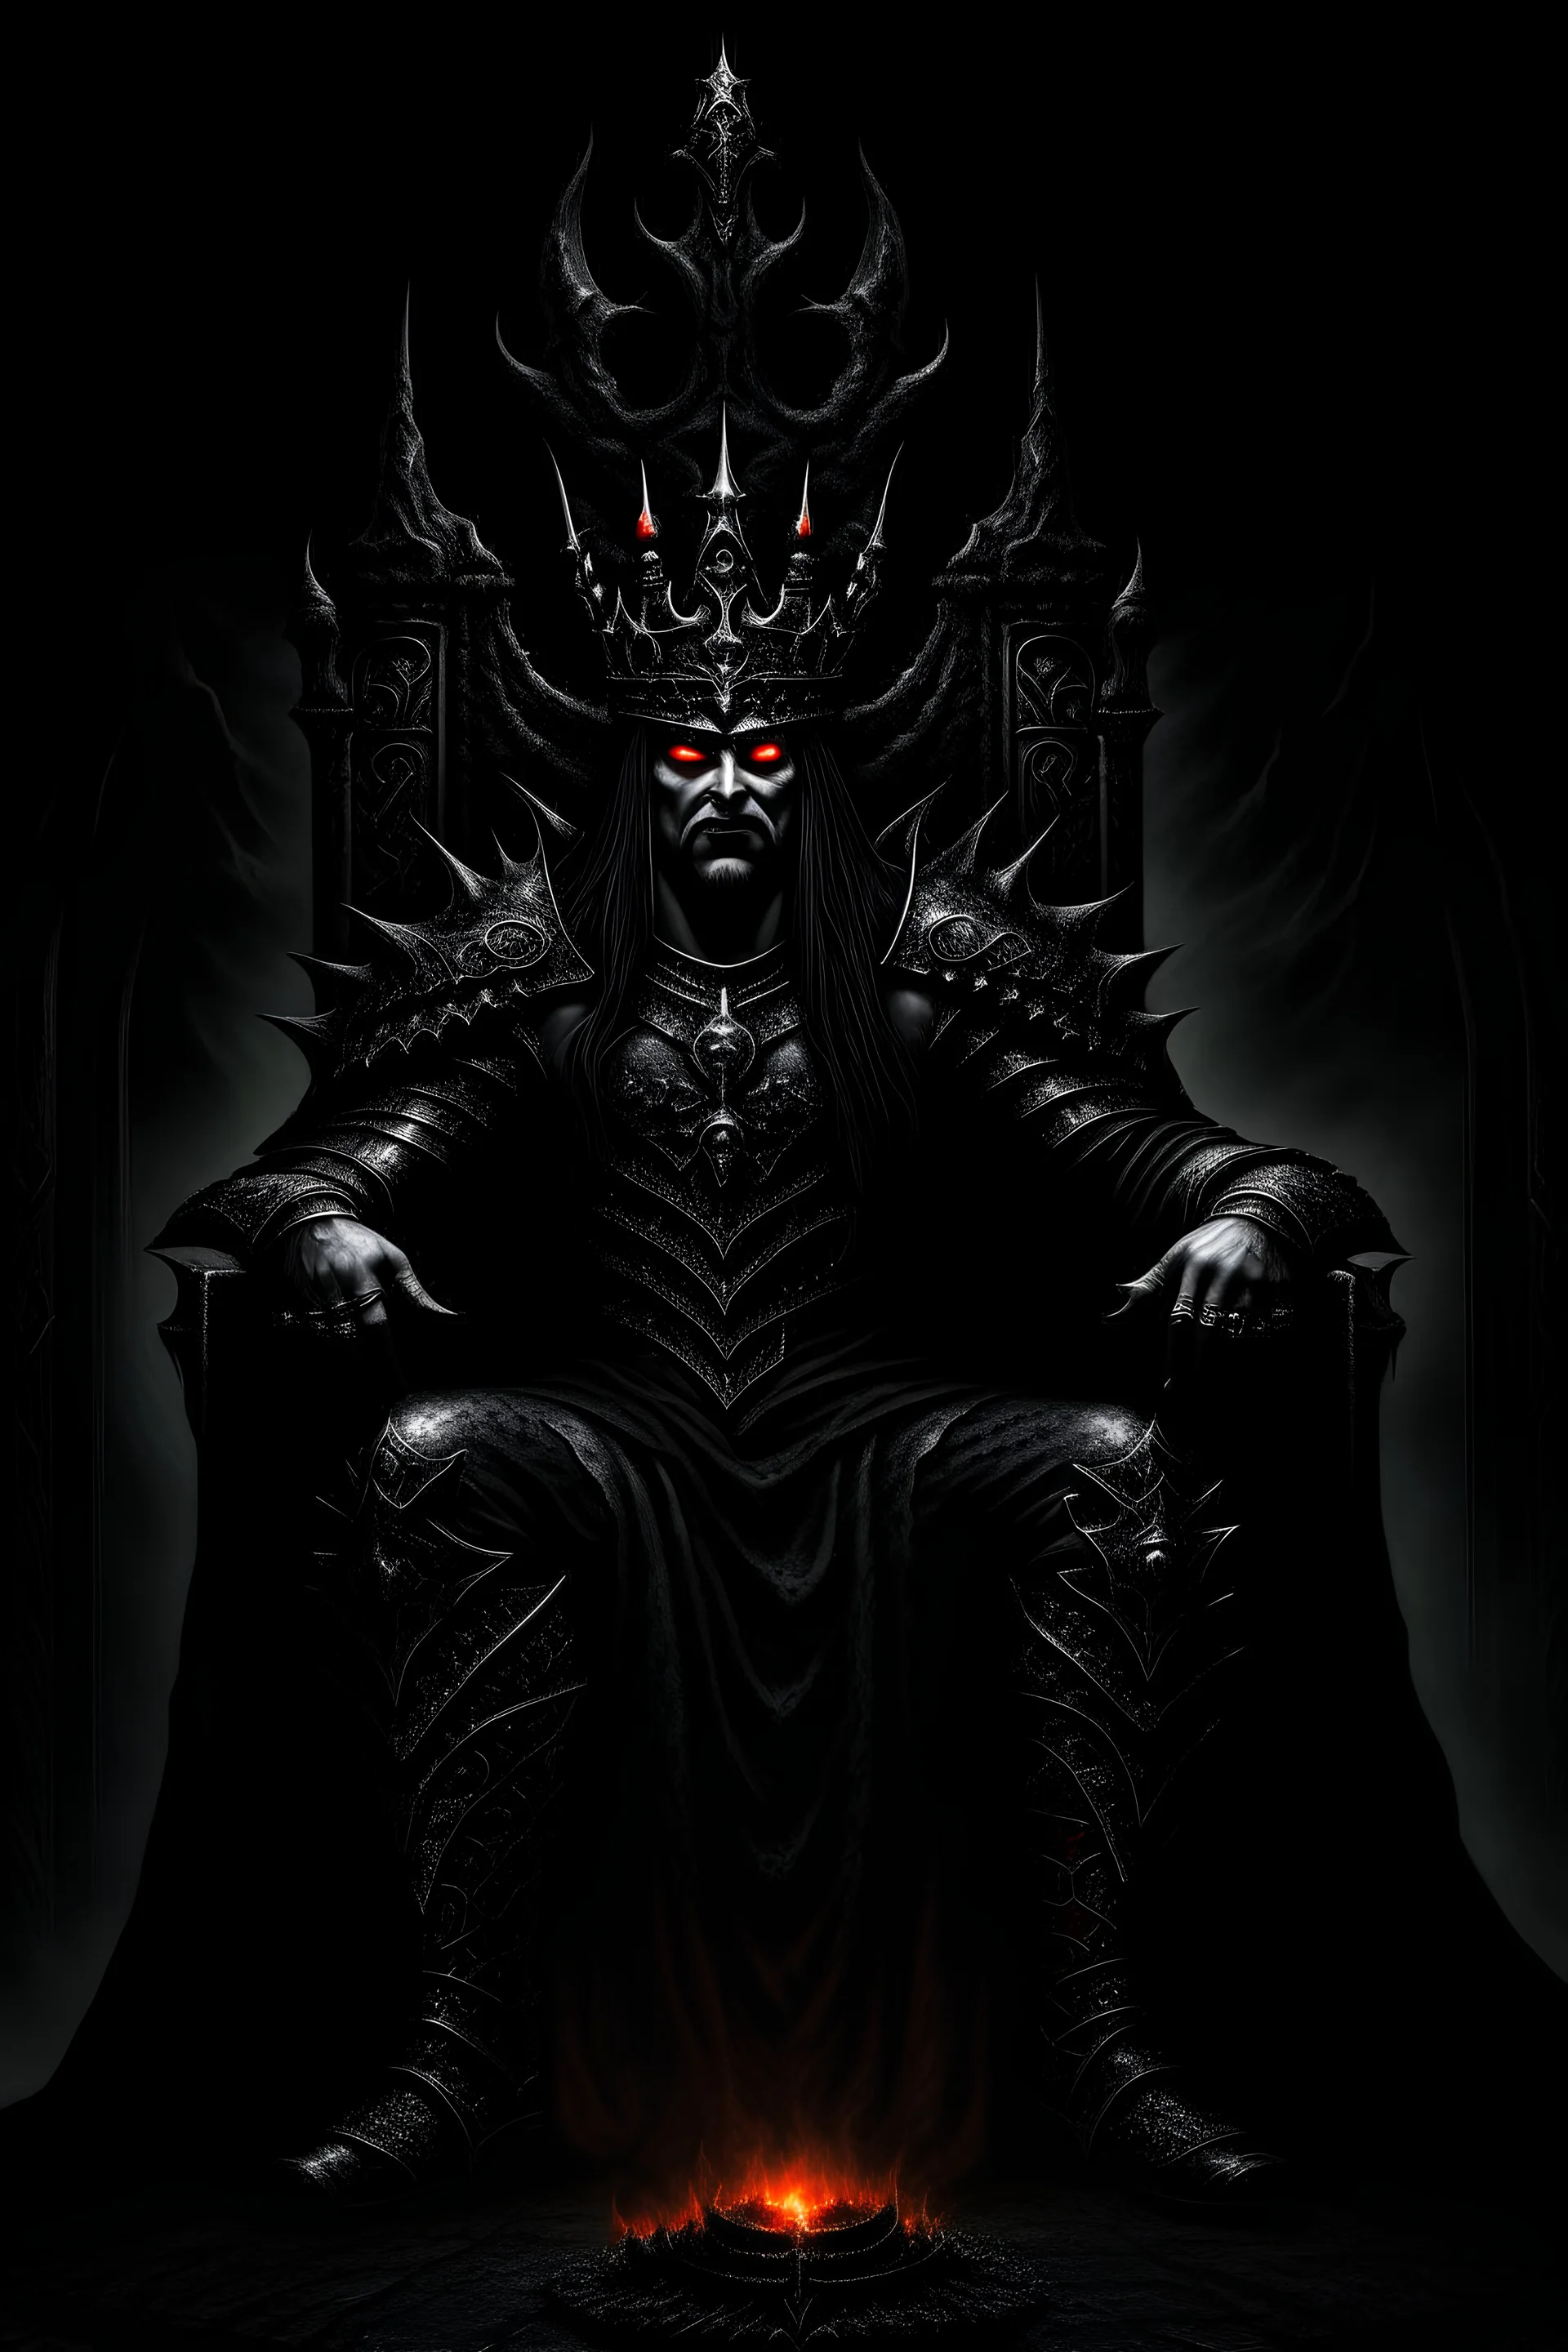 King of Darkness